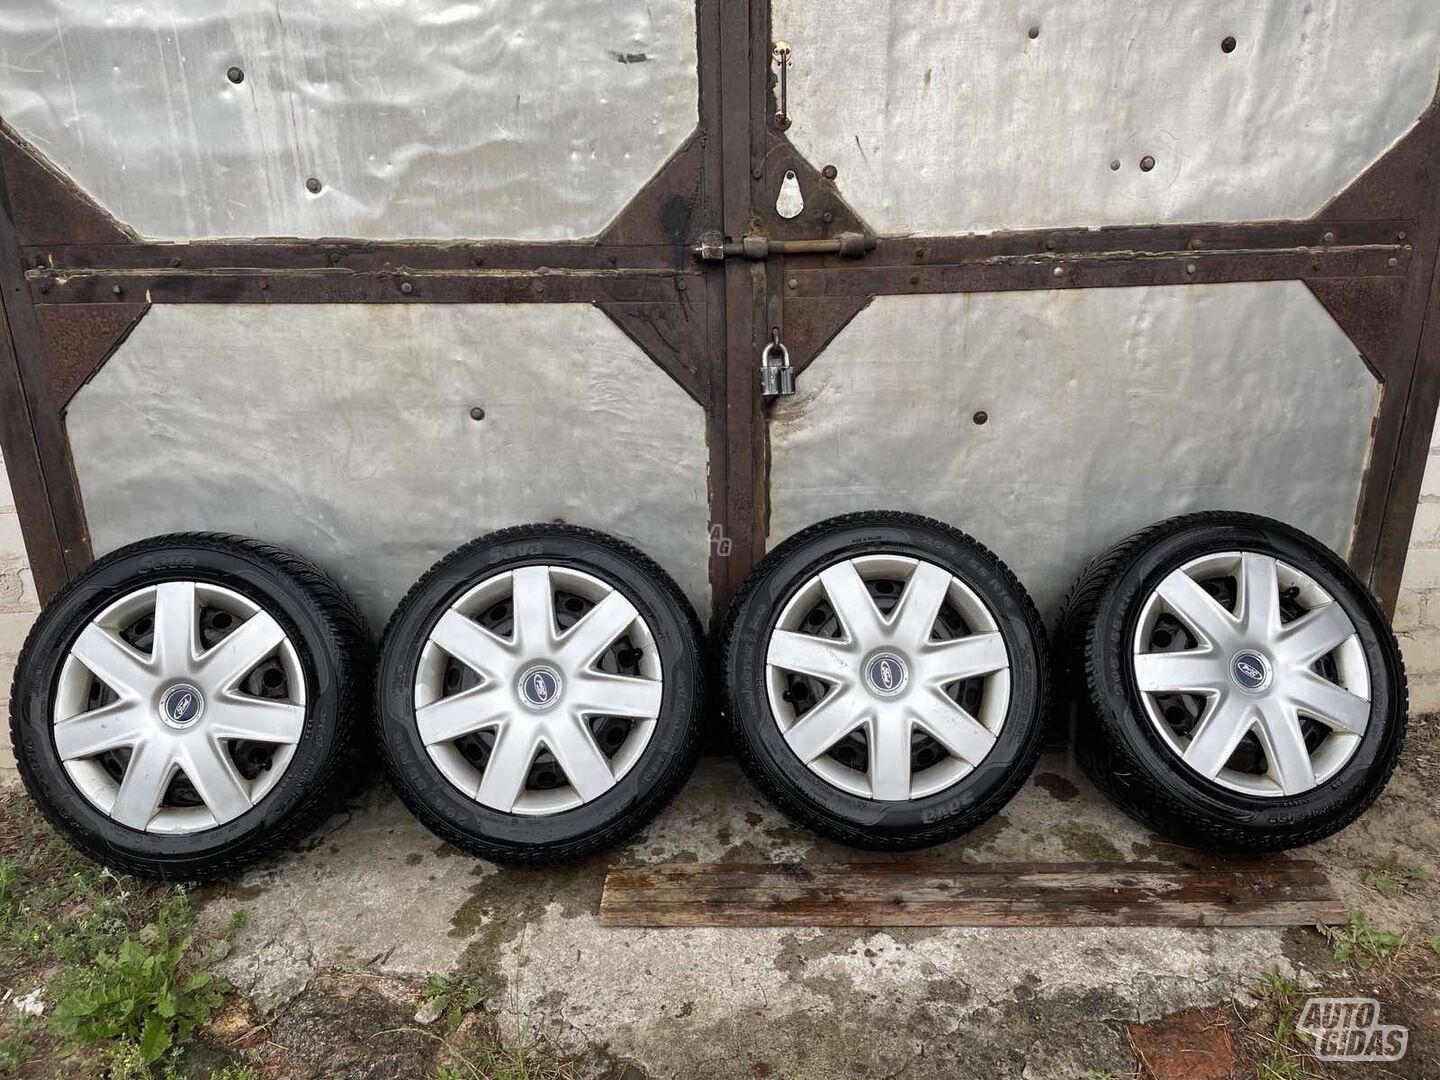 Ford R16 steel stamped rims